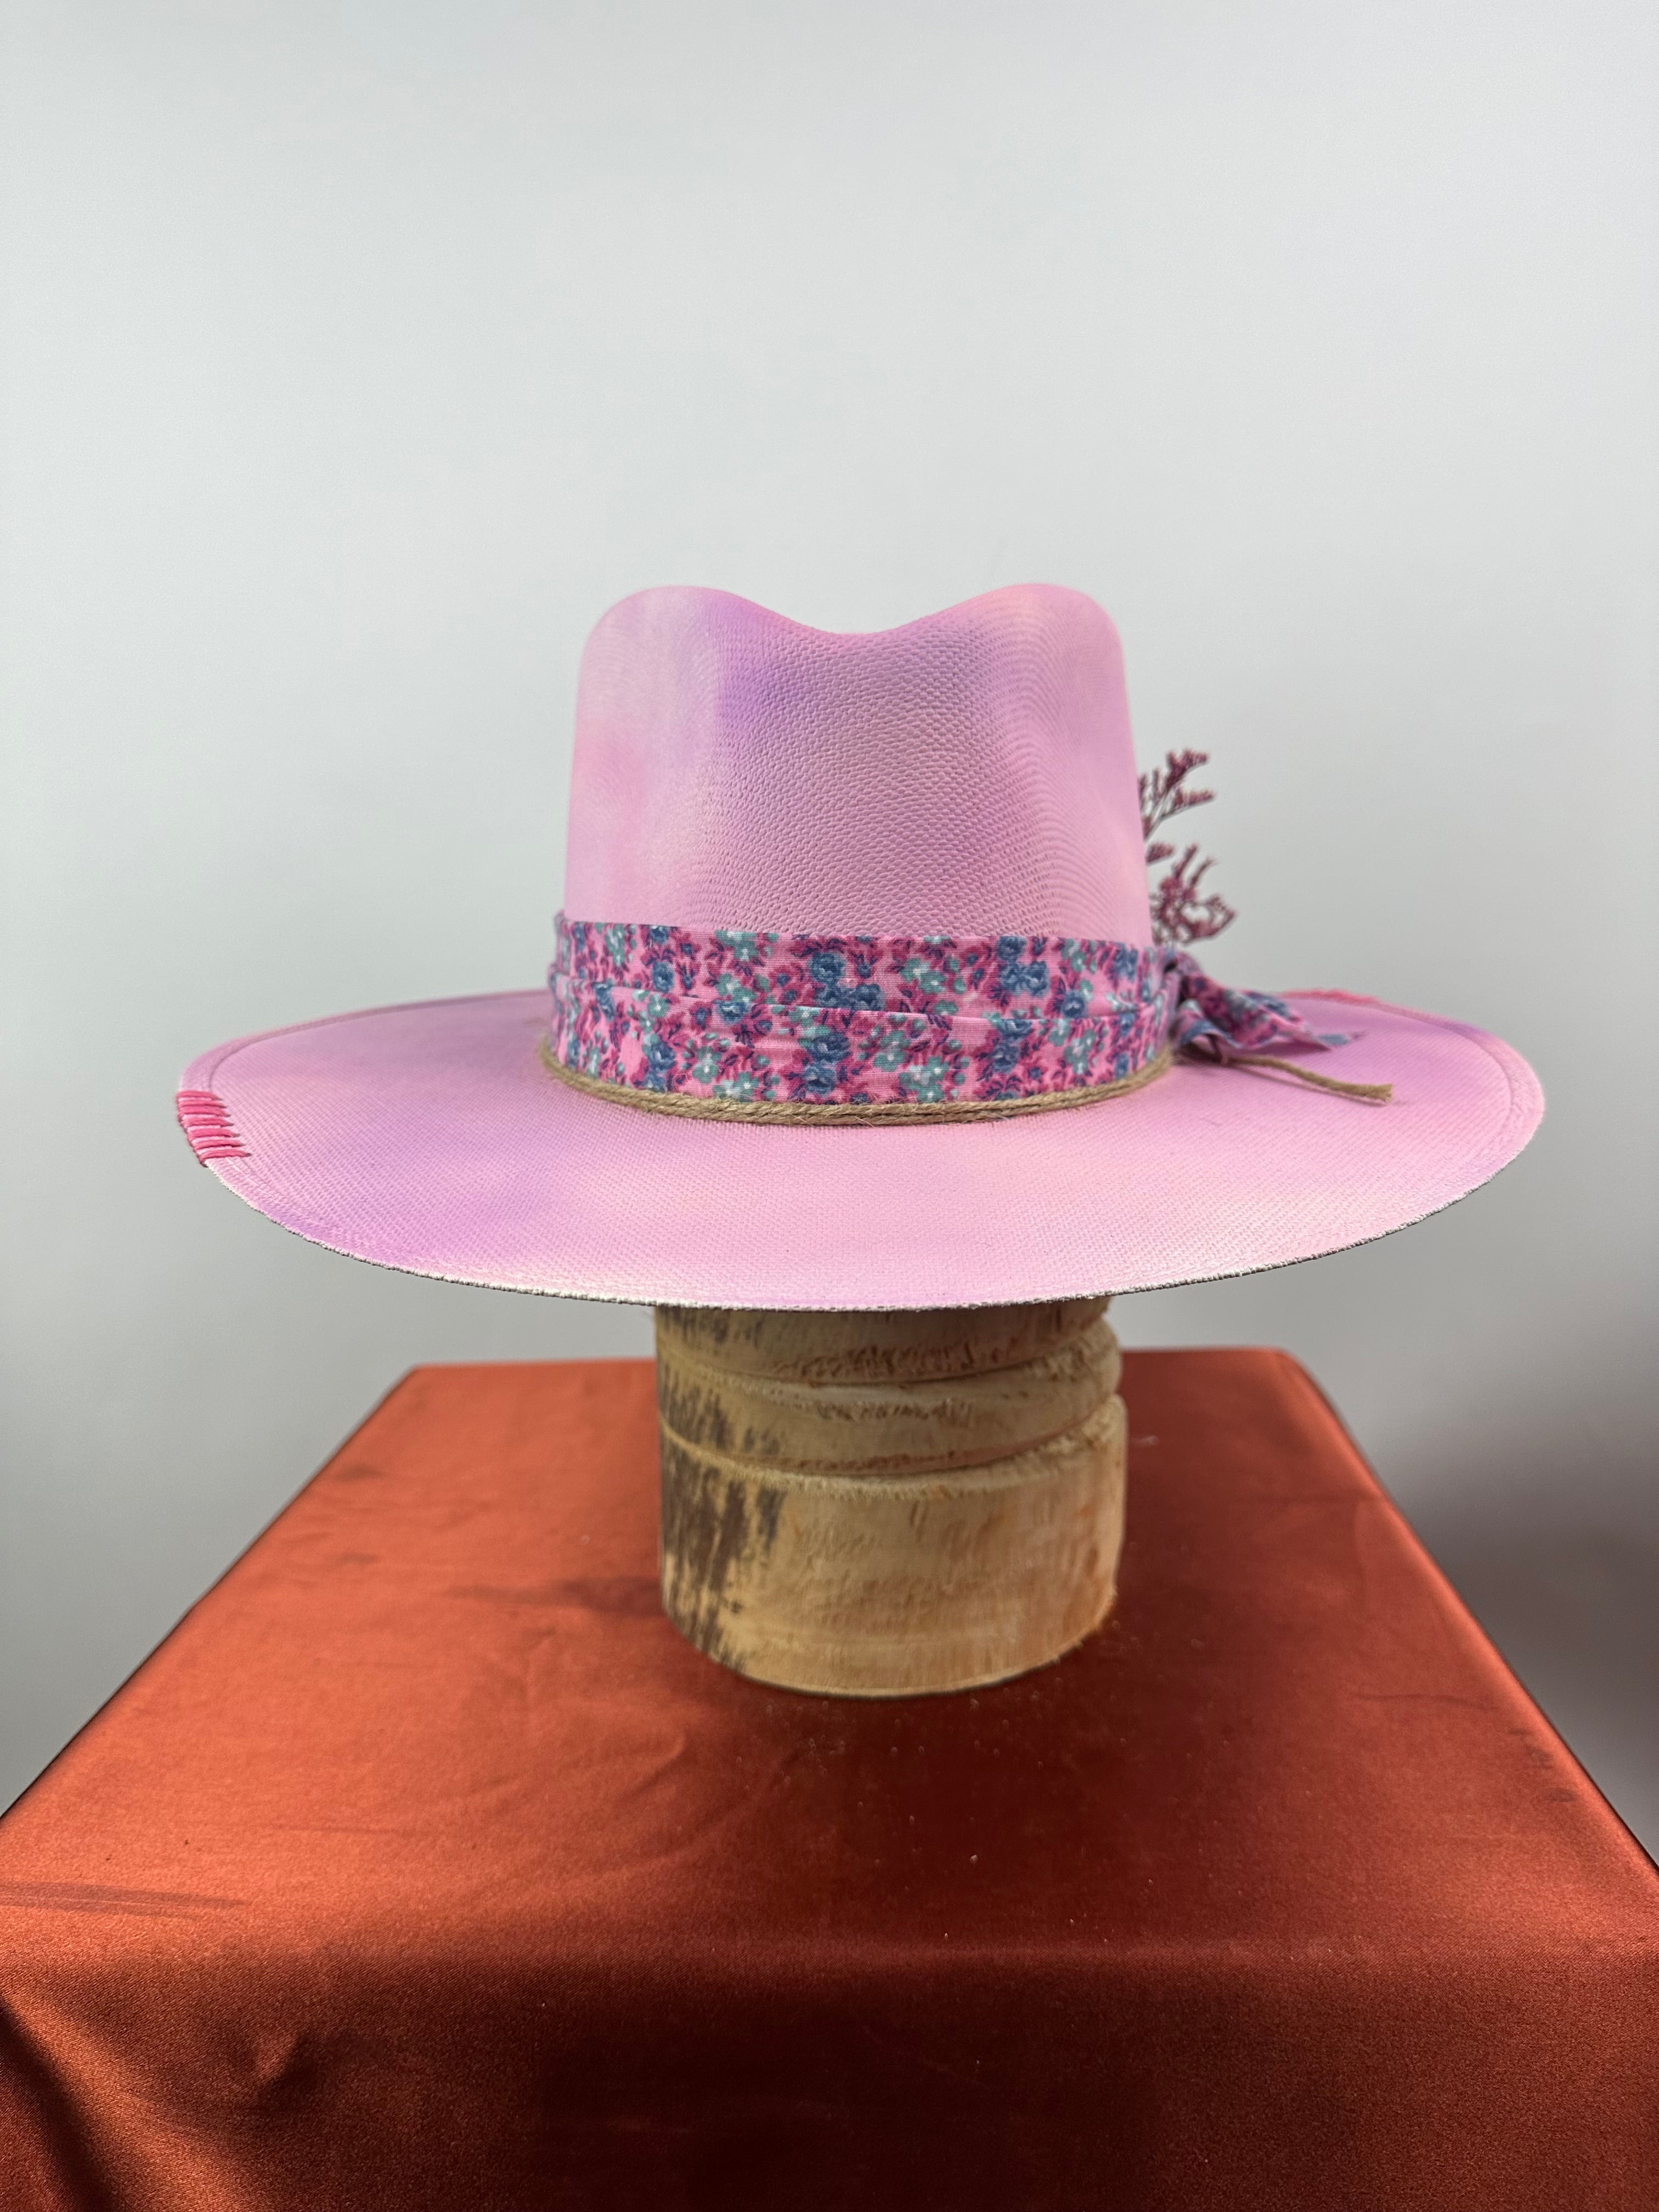 Cotton Candy Straw Hat 7 3/8